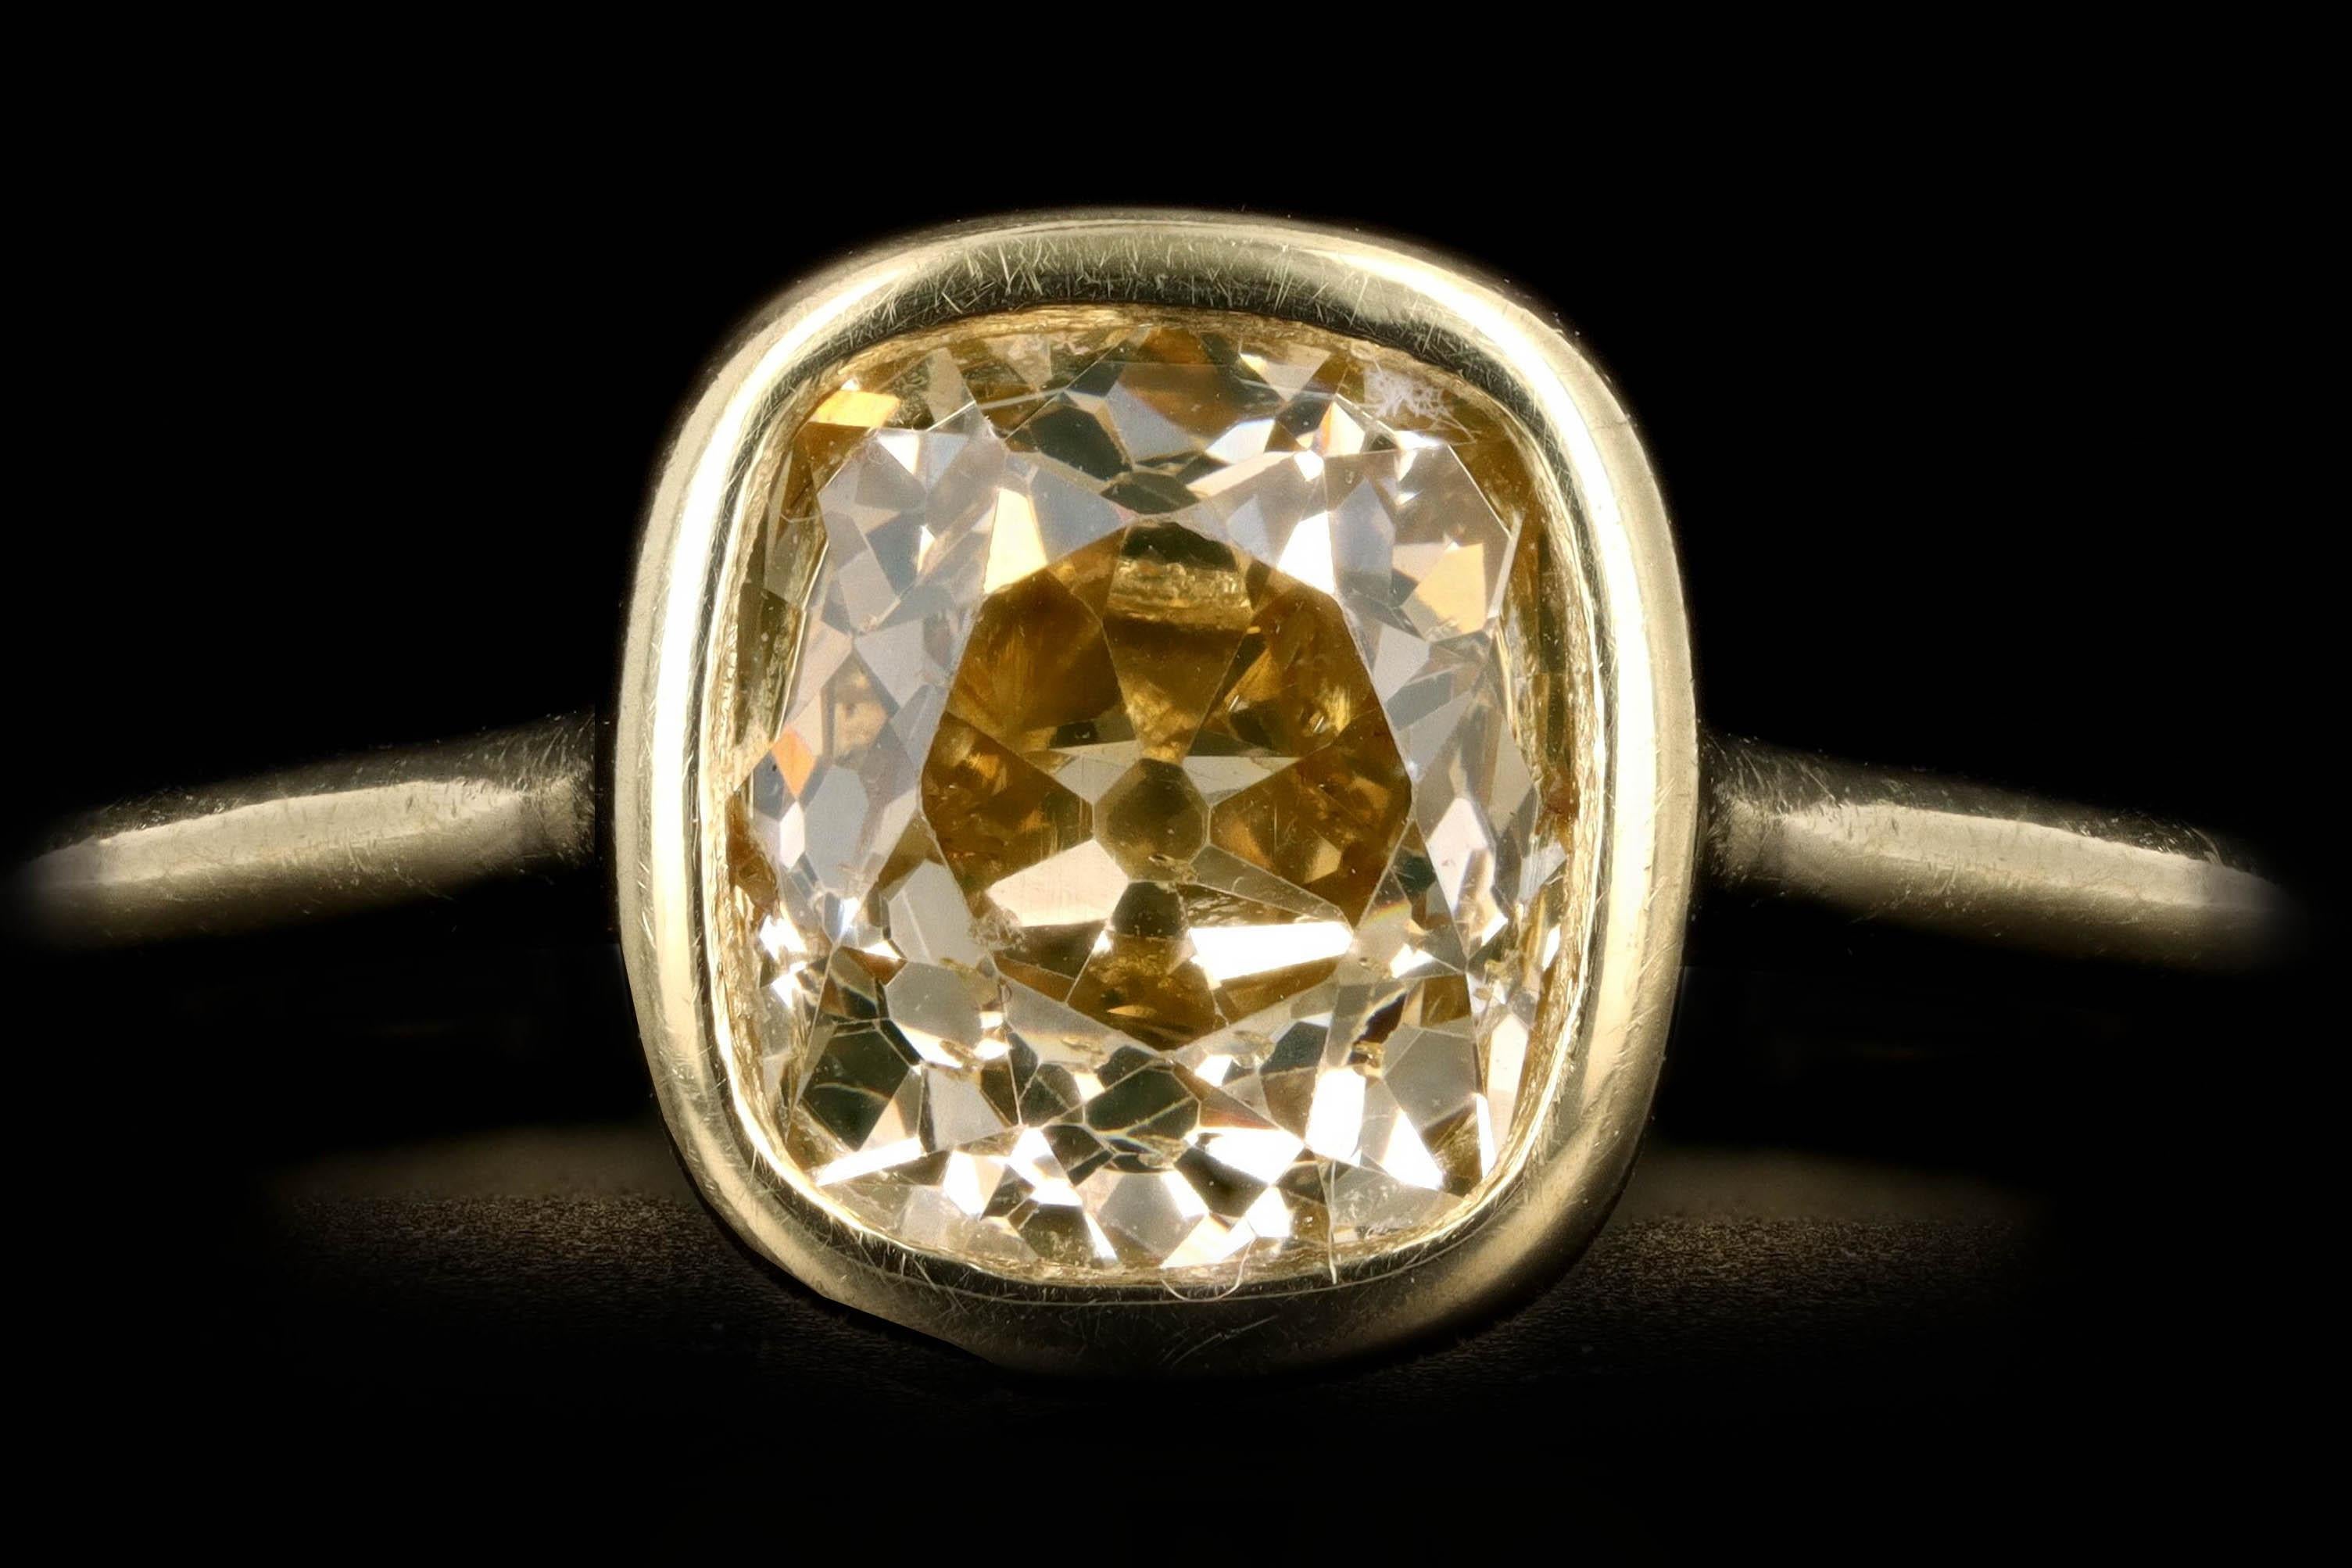 Era: Modern

Composition: 18K Yellow Gold

Primary Stone: Old Mine Cut Champagne Diamond

Carat Weight: Approximately 2.05 Carats

Color/Clarity: Champagne/SI2

Ring Weight: 3.3 Grams

Ring Size: 6

Item Barcode: 238944